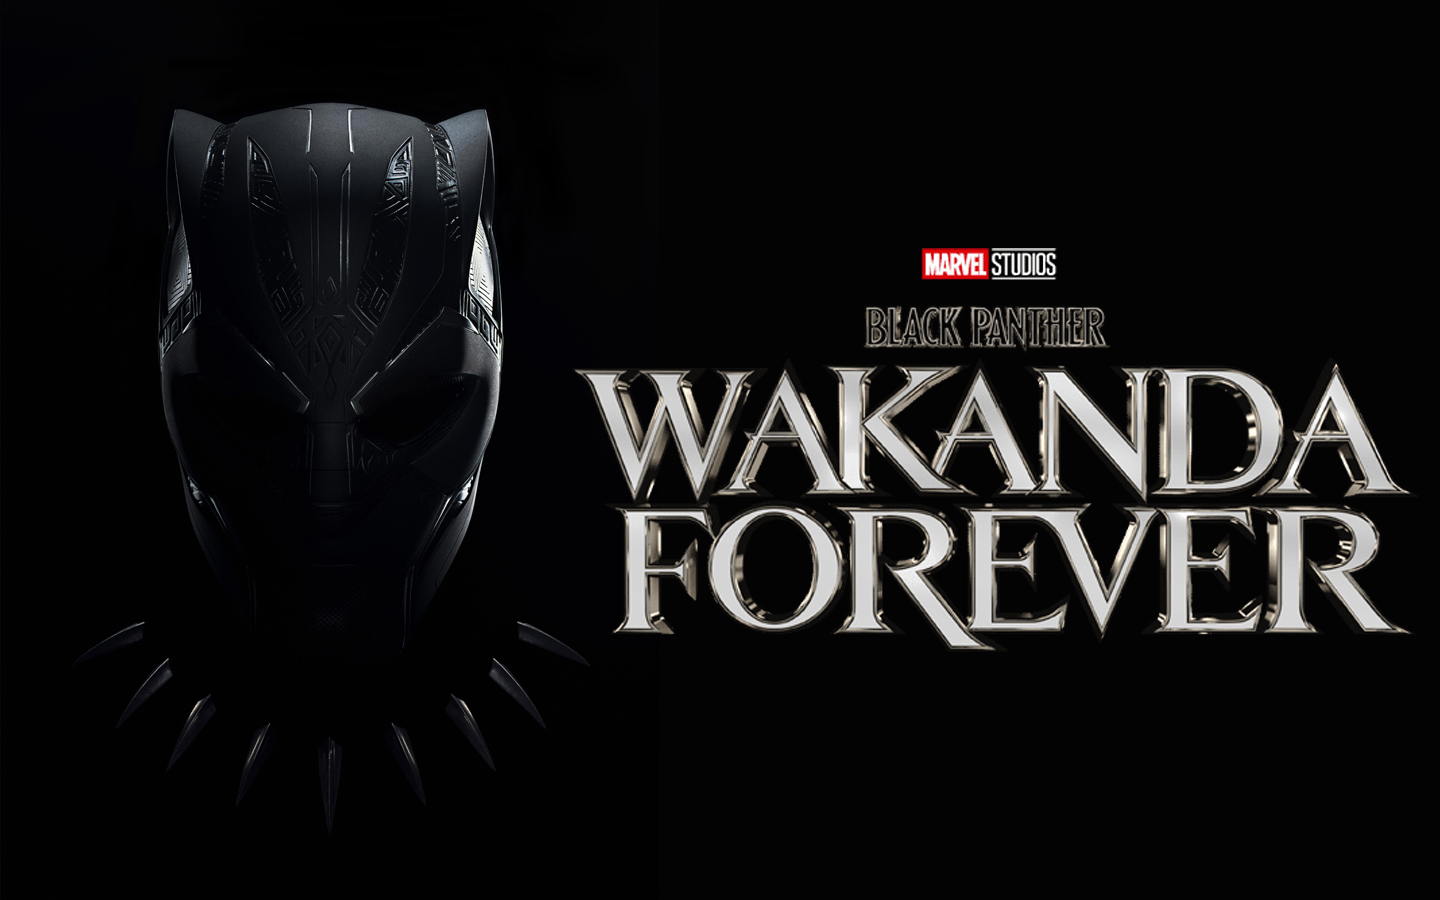 MOVIE REVIEW: Magic of Black Panther: Wakanda Forever